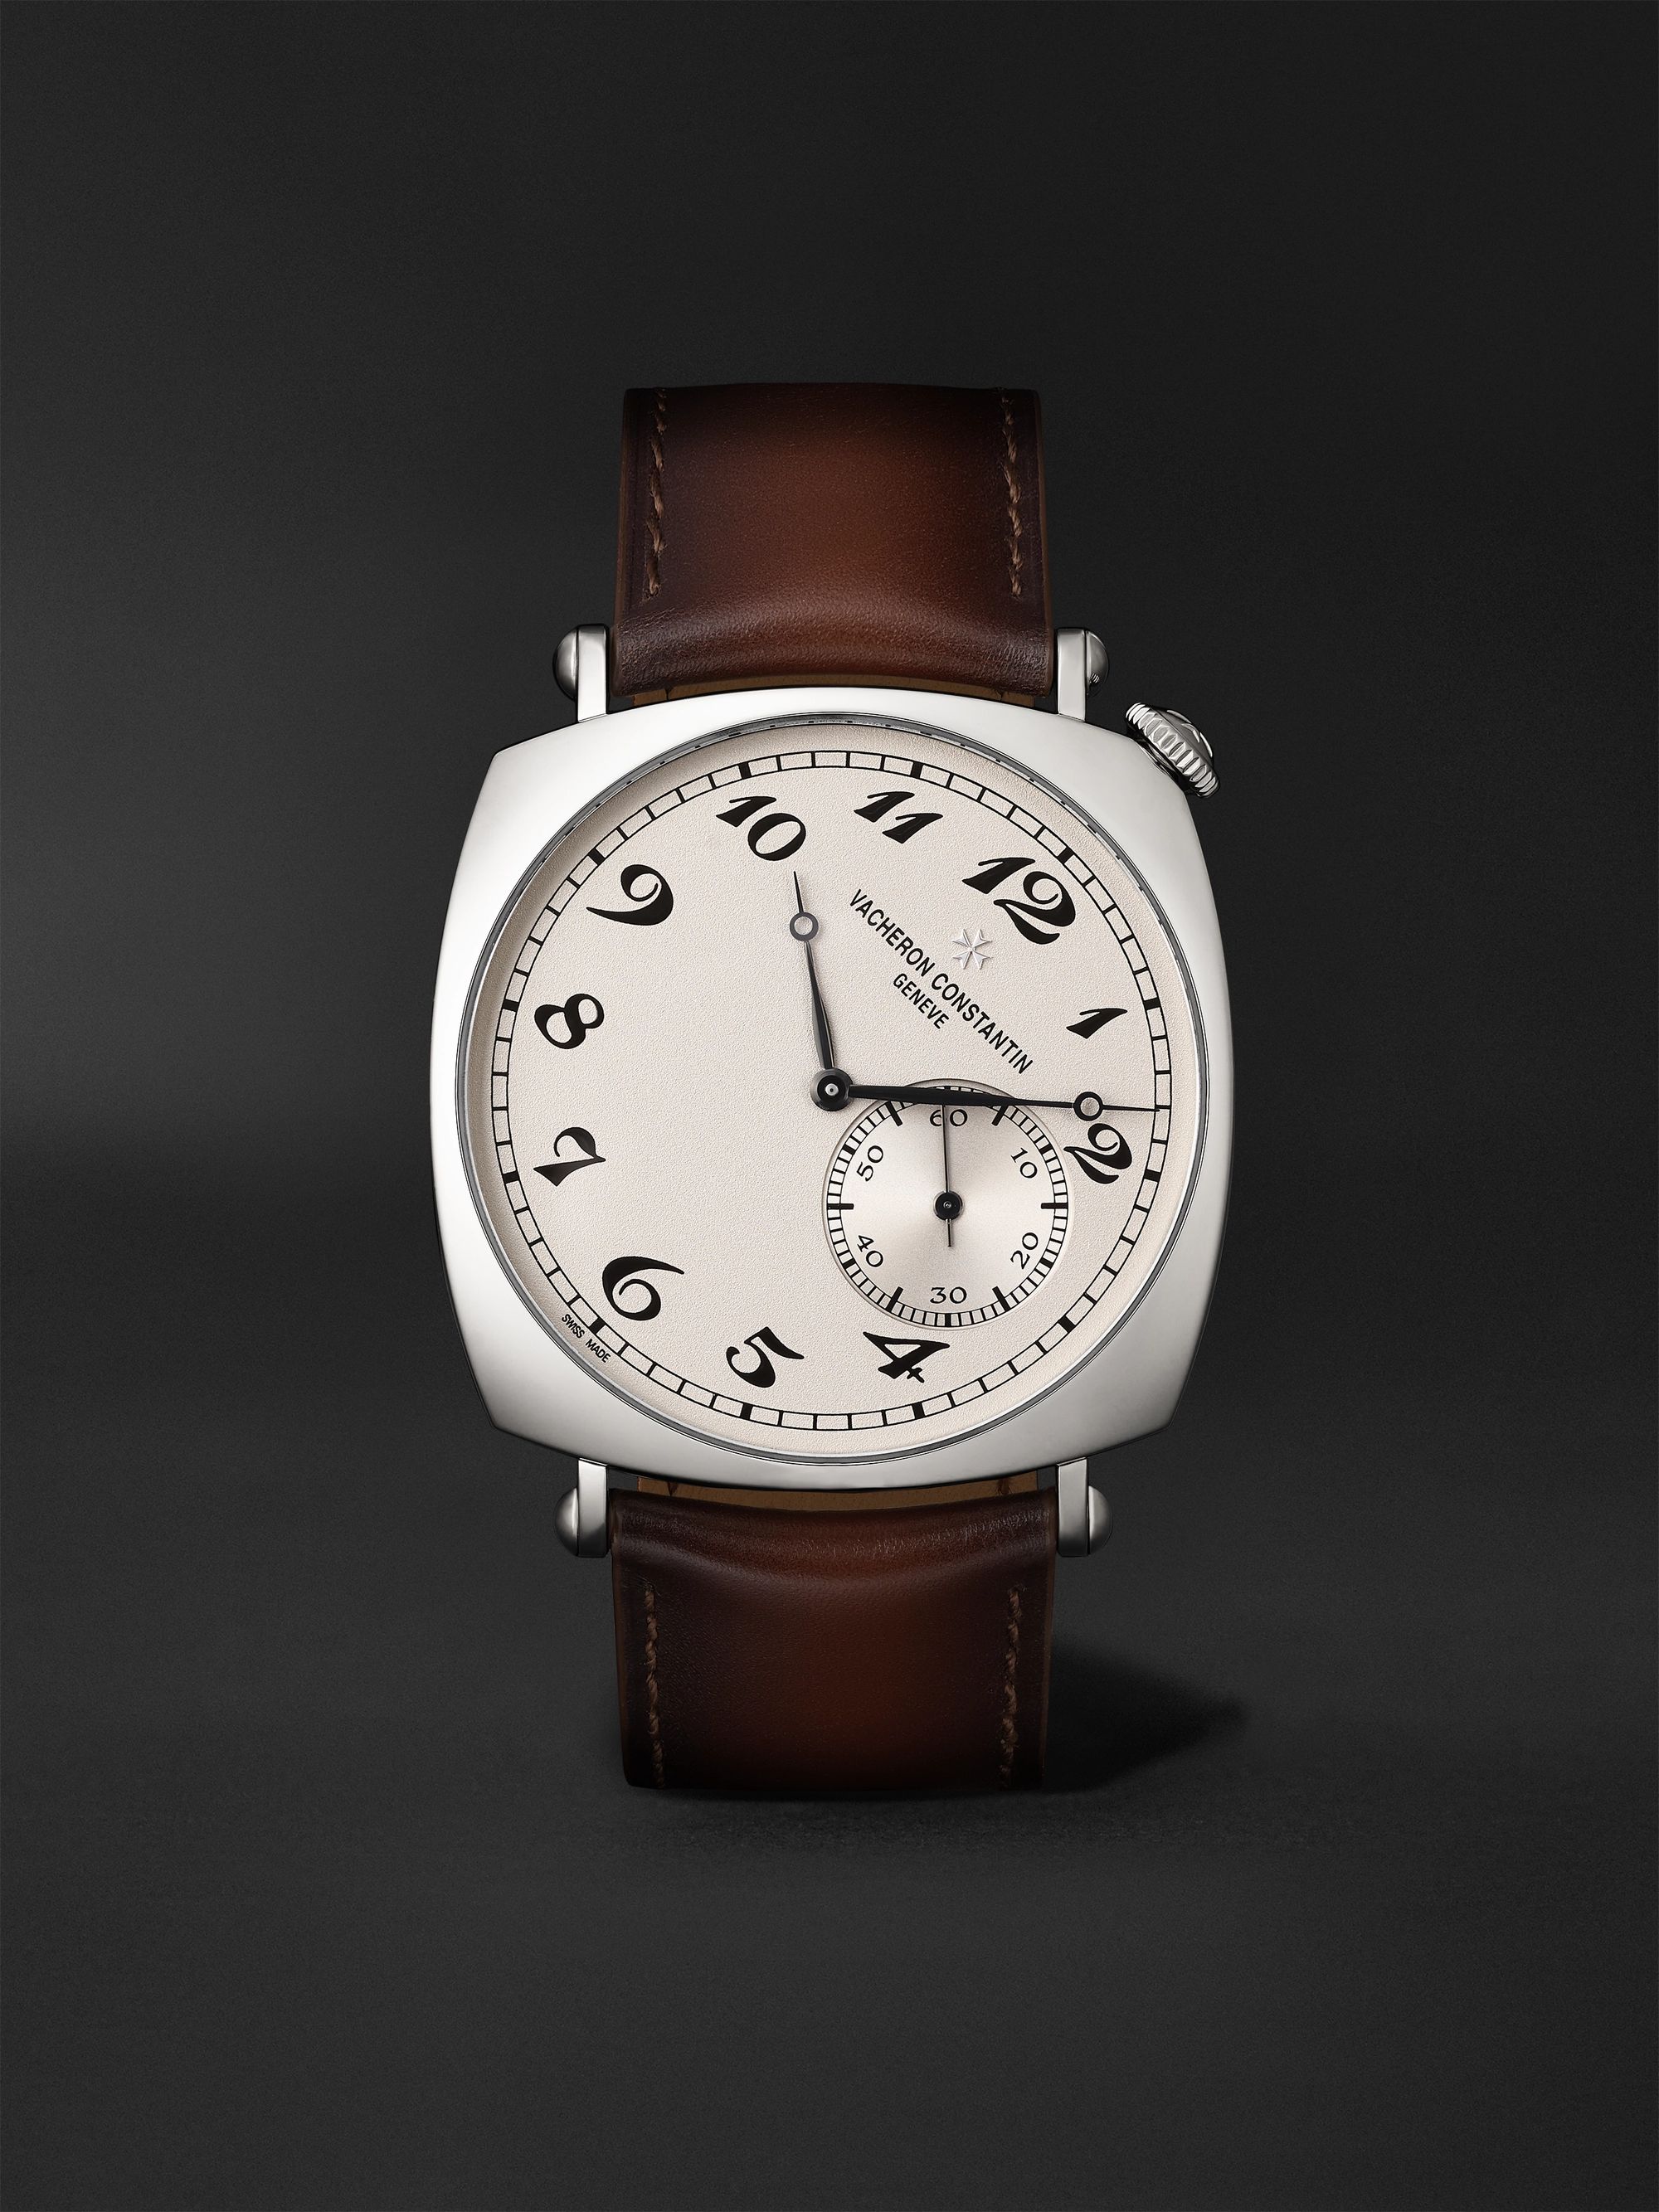 VACHERON CONSTANTIN Historiques American 1921 Hand-Wound 40mm 18-Karat White Gold and Leather Watch, Ref. No. 82035/000G-B735